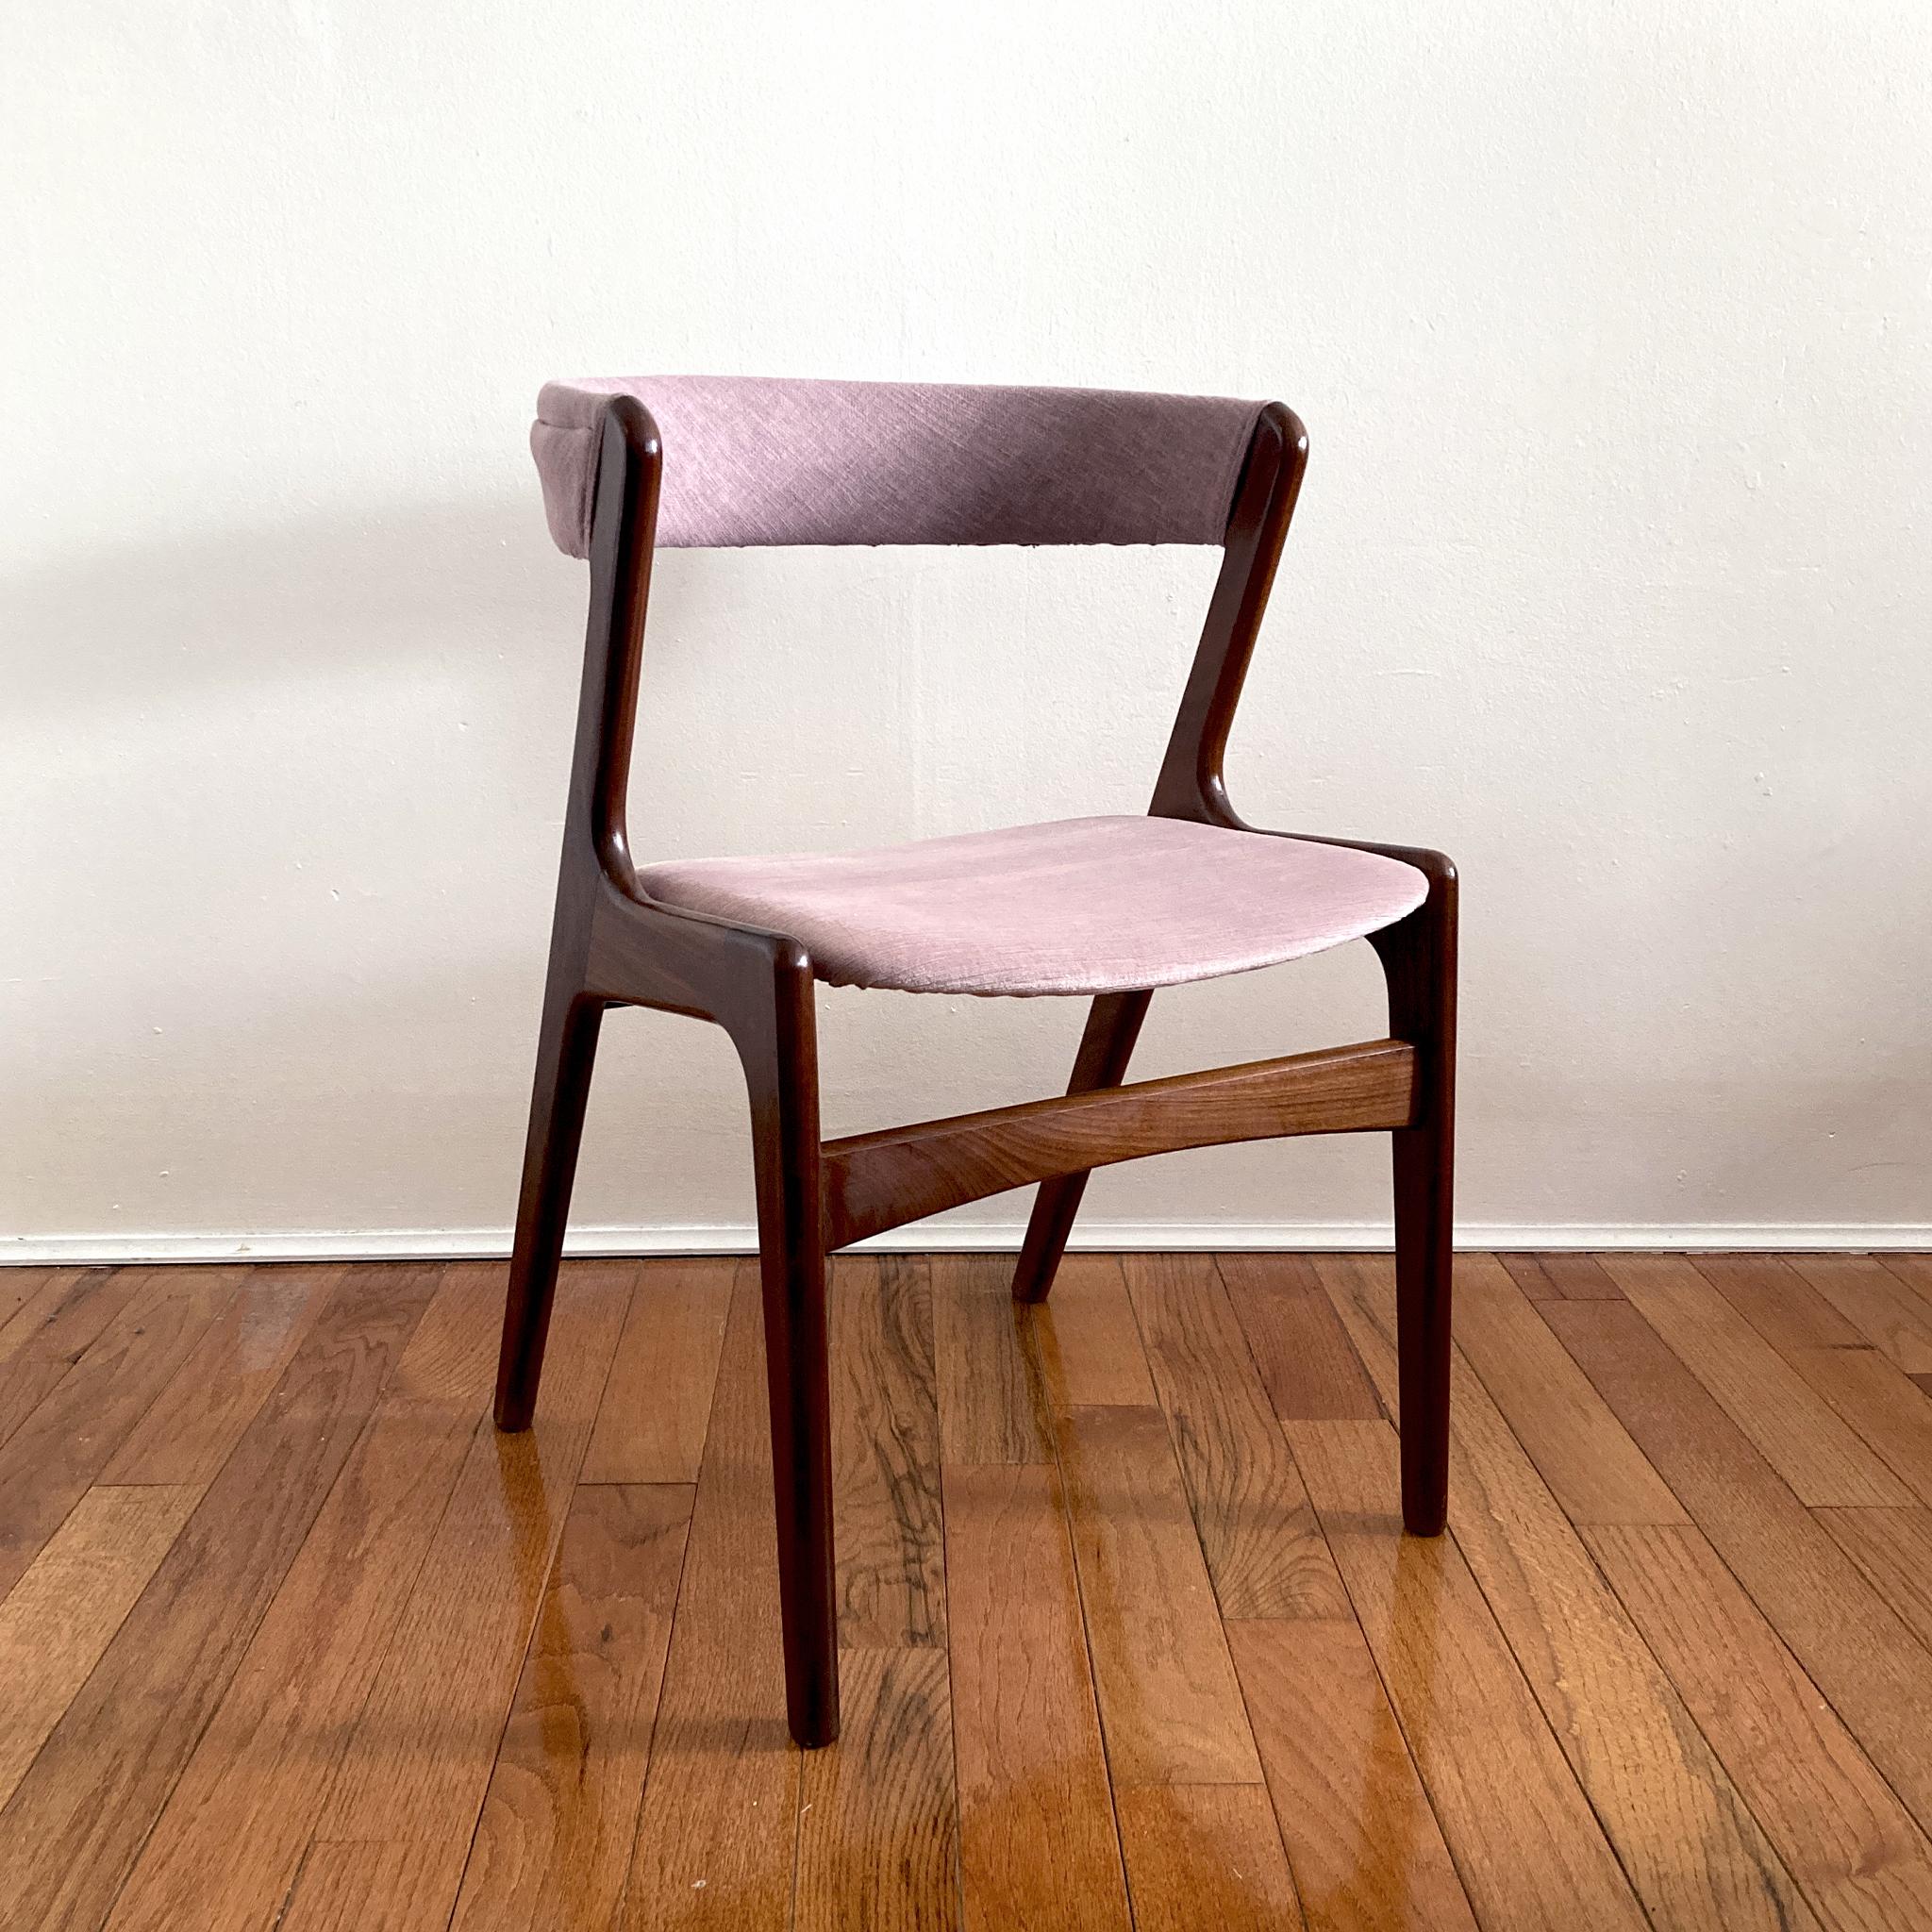 Mid-Century Modern Kai Kristiansen Mauve Pink Curved Back Chair, 1960s For Sale